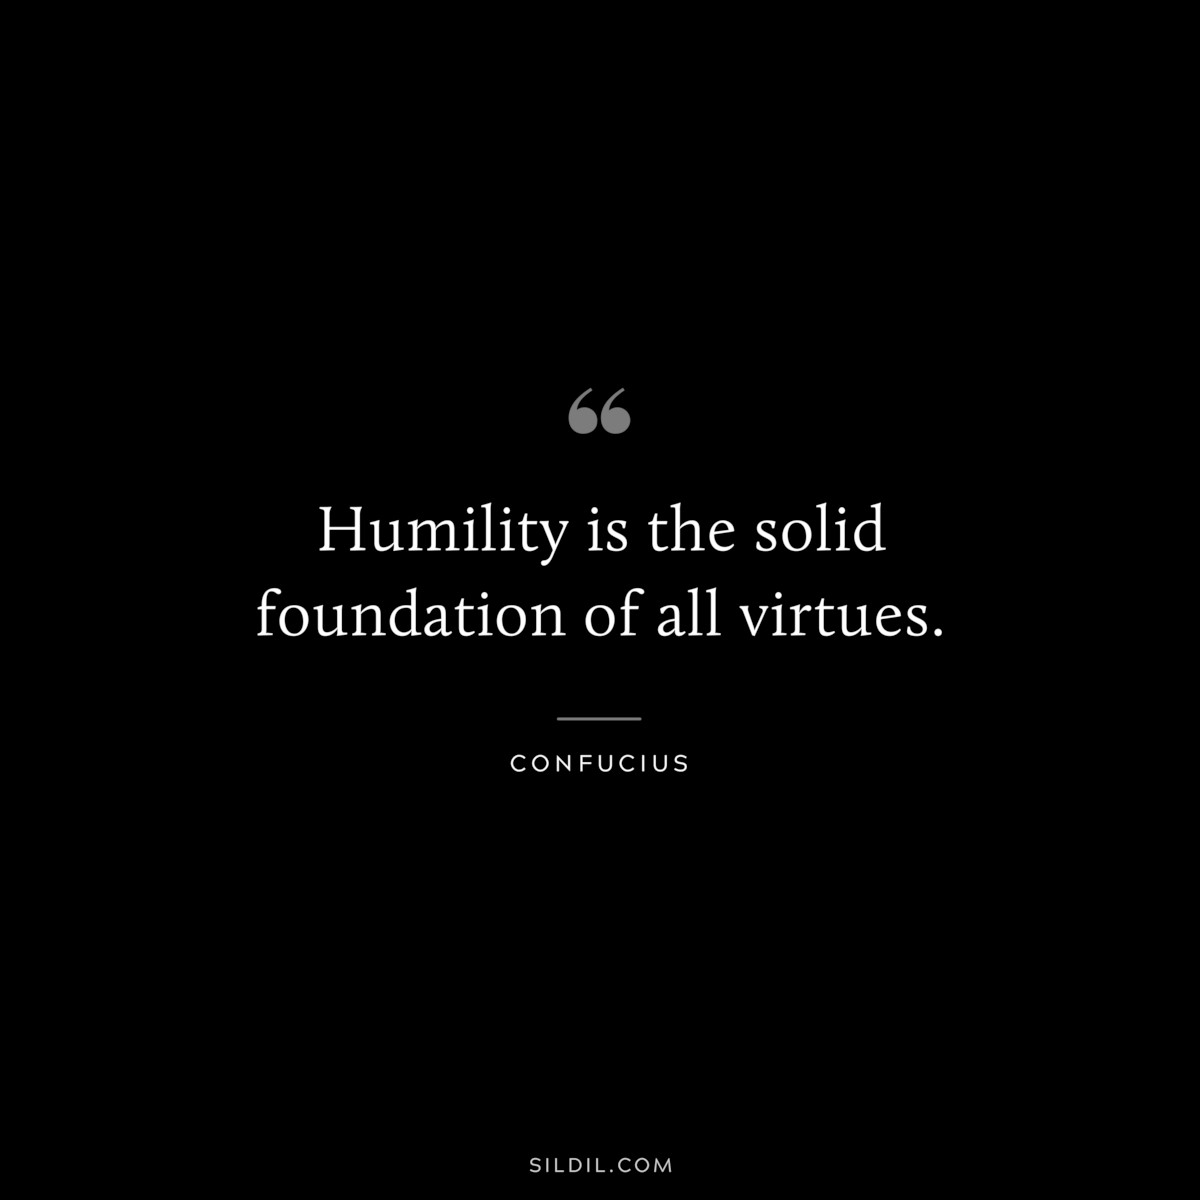 Humility is the solid foundation of all virtues. ― Confucius